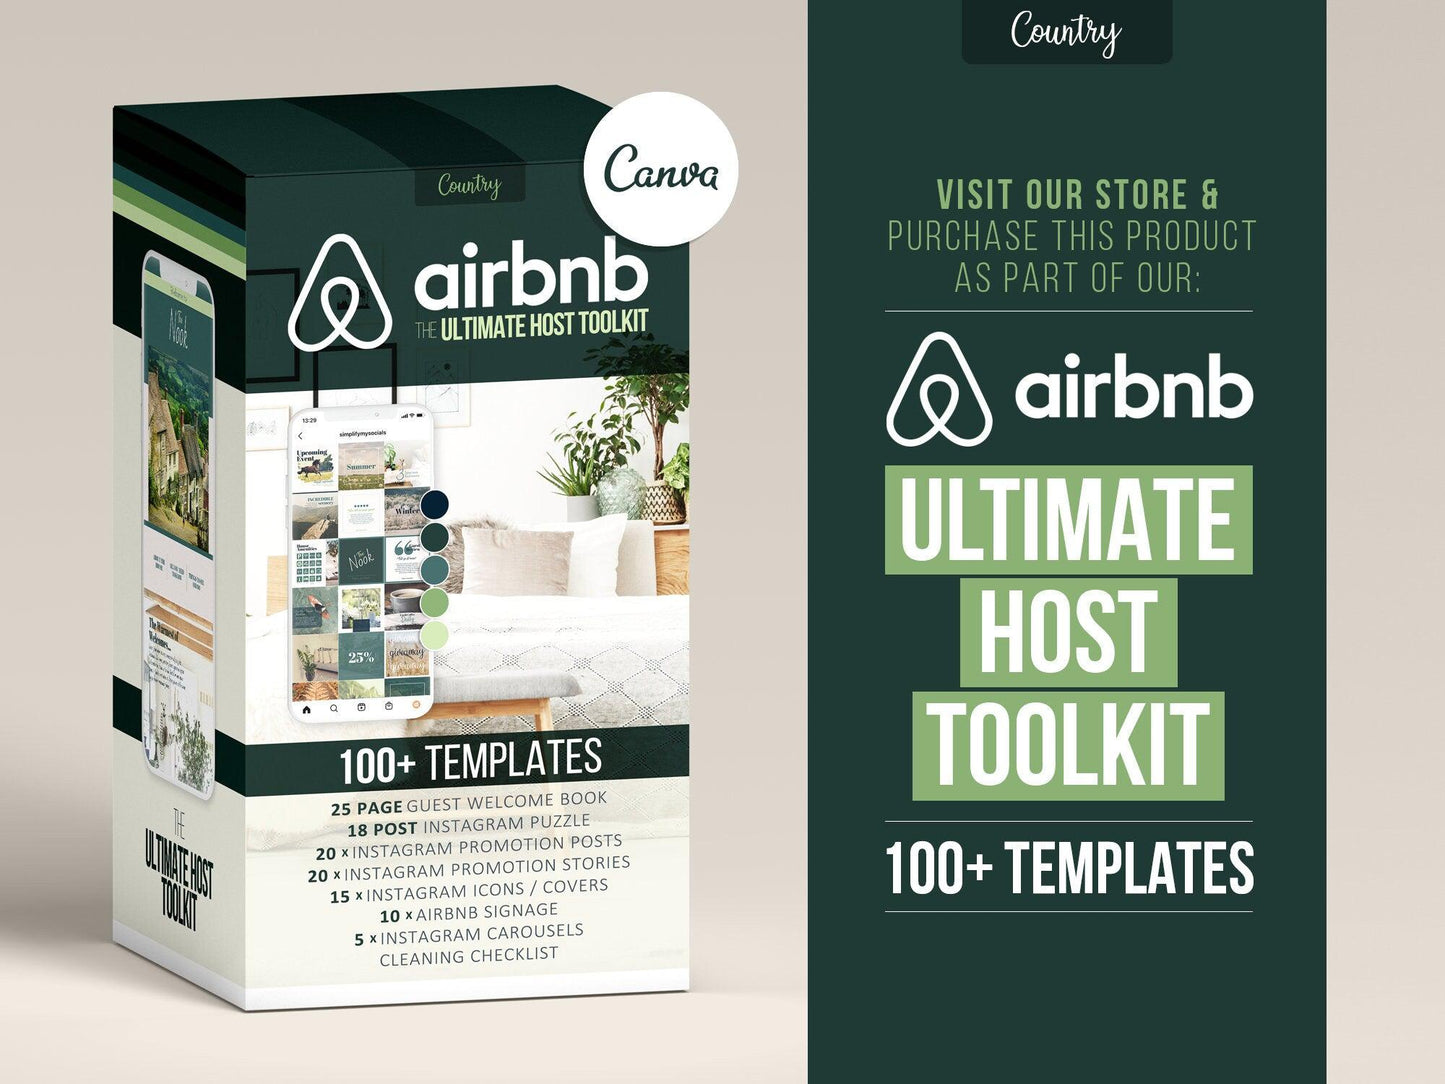 55 Airbnb Instagram Promotion Pack For Social Media (country)